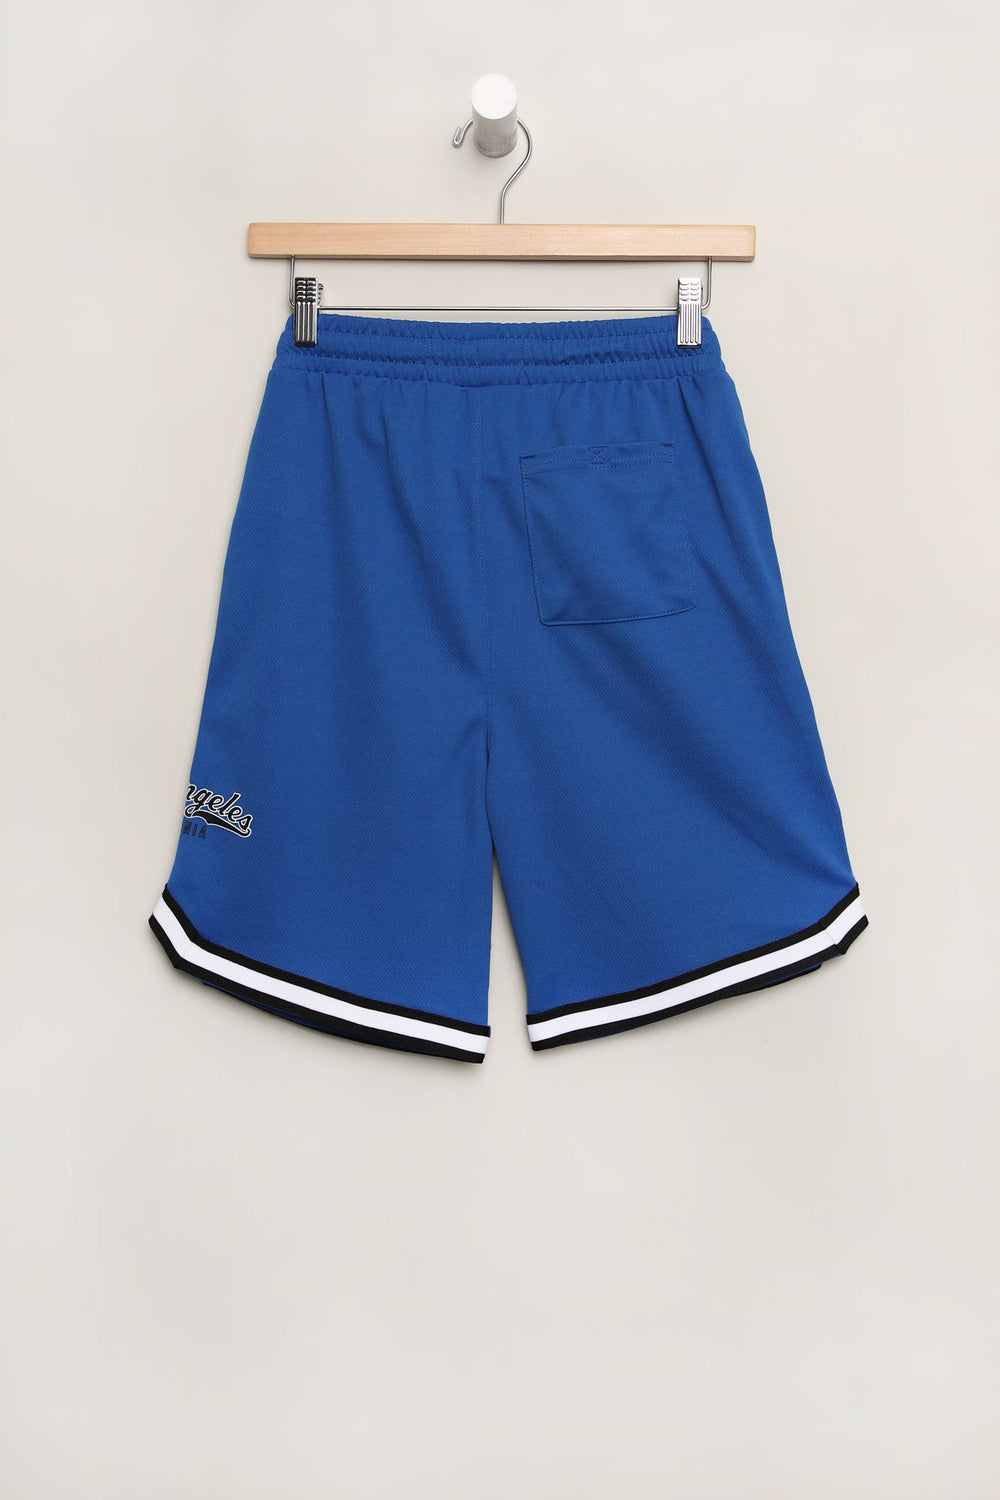 West49 Youth Los Angeles Mesh Shorts West49 Youth Los Angeles Mesh Shorts